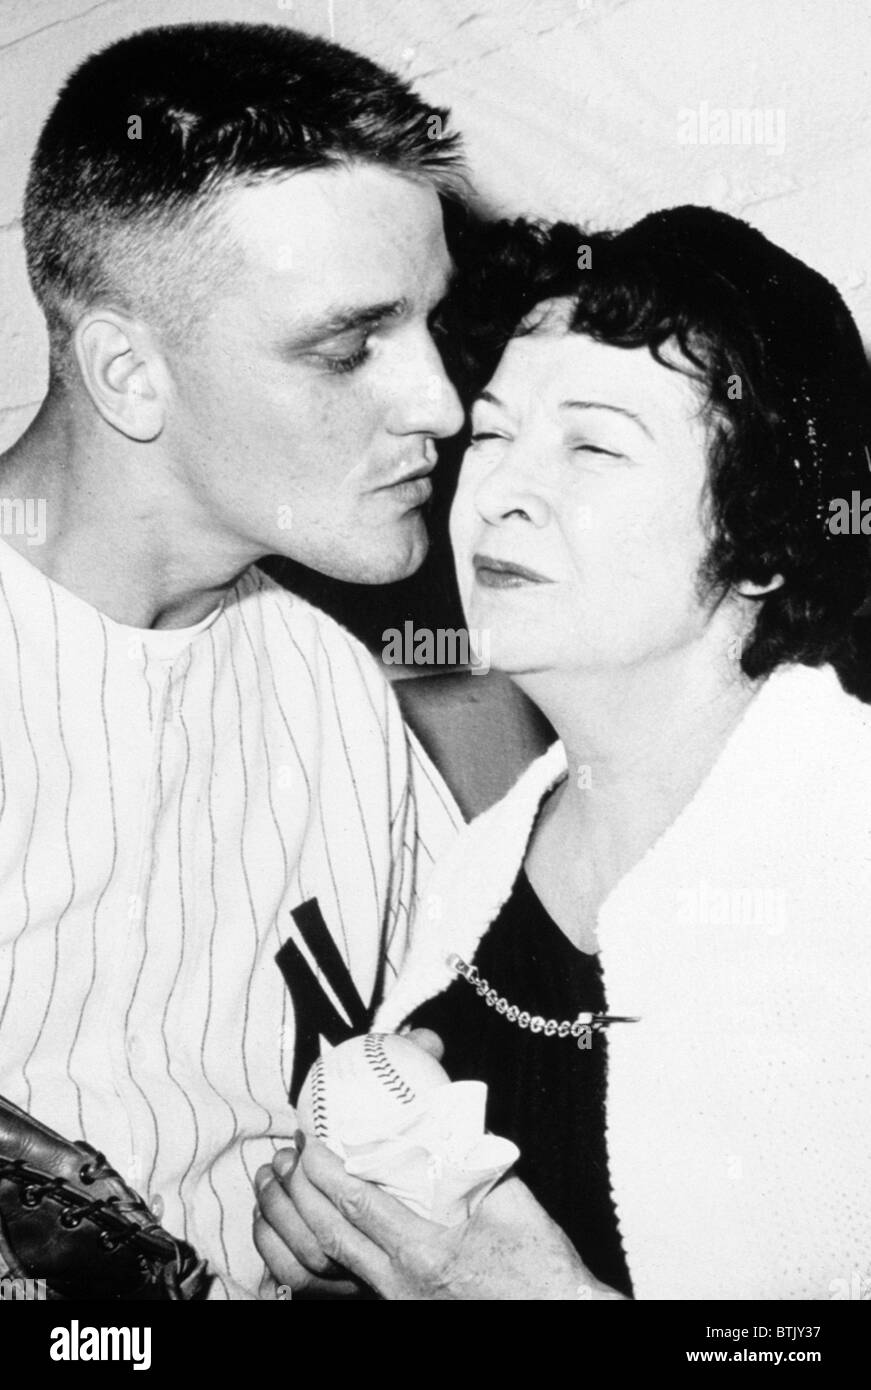 Roger Maris (NY Yankees) with Mrs. Babe Ruth after hitting 60th home run, 1961. Stock Photo